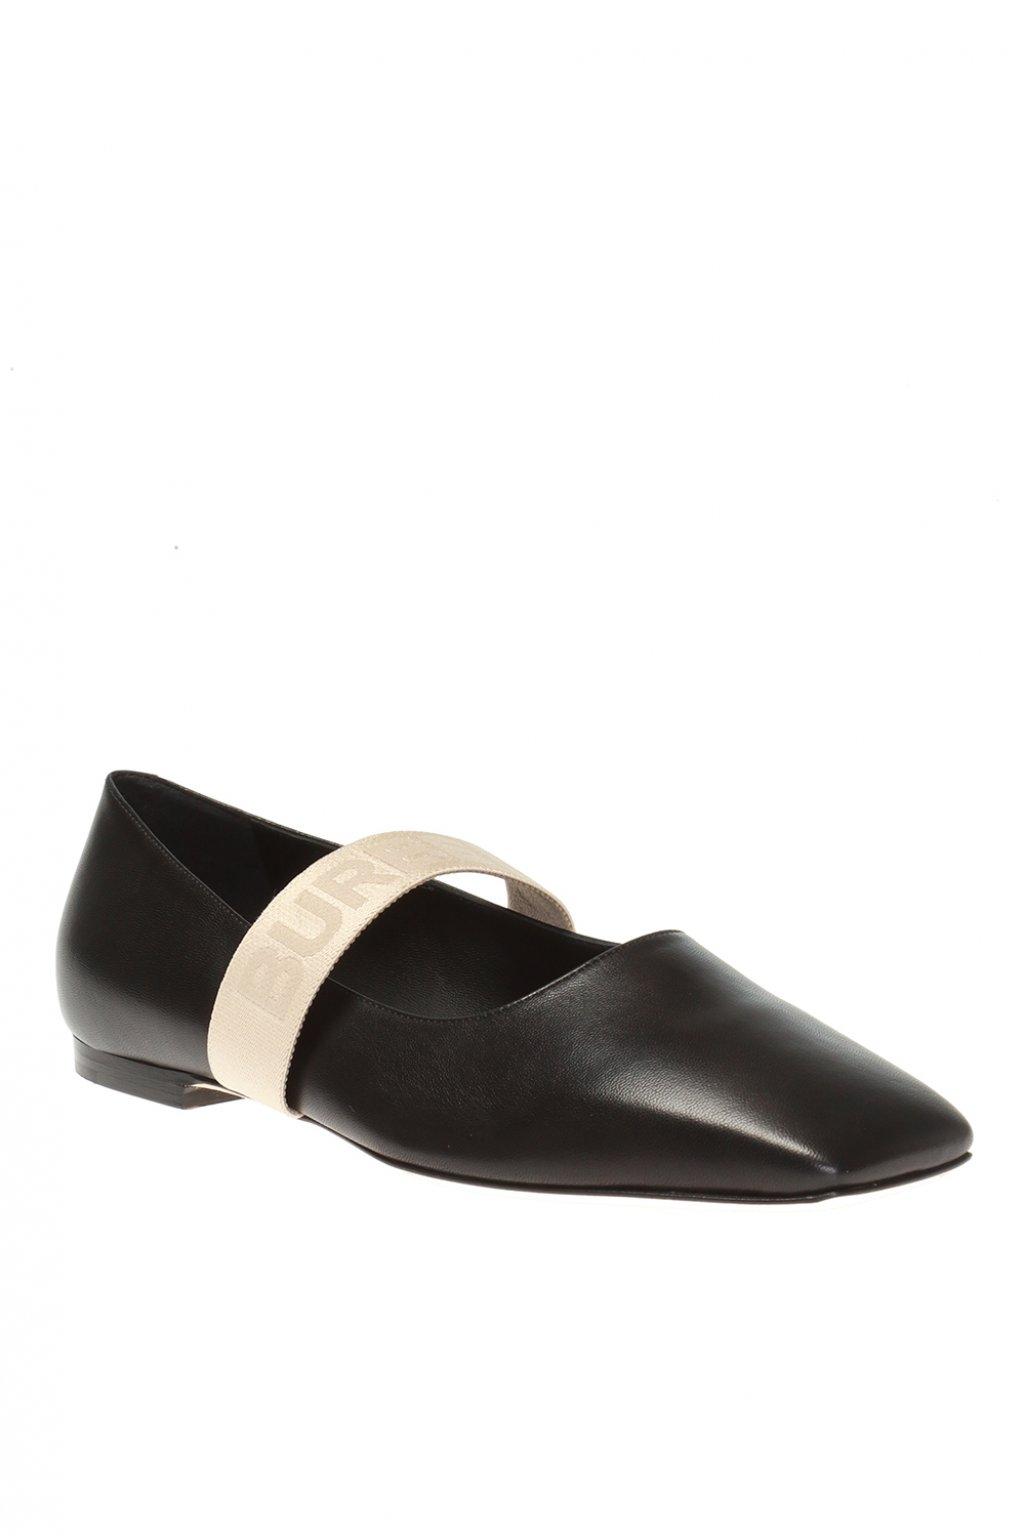 Burberry Logo Leather Ballet Flats in Black - Save 19% - Lyst